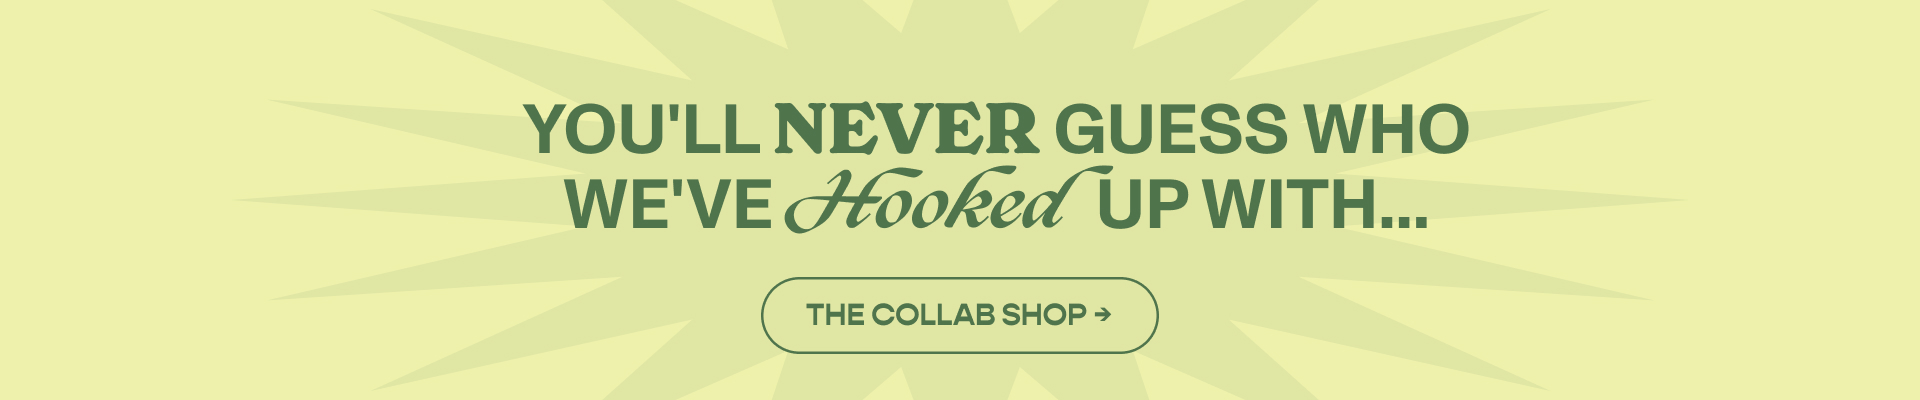 You'll Never Guess Who We've Hooked Up With. The Collab Shop.